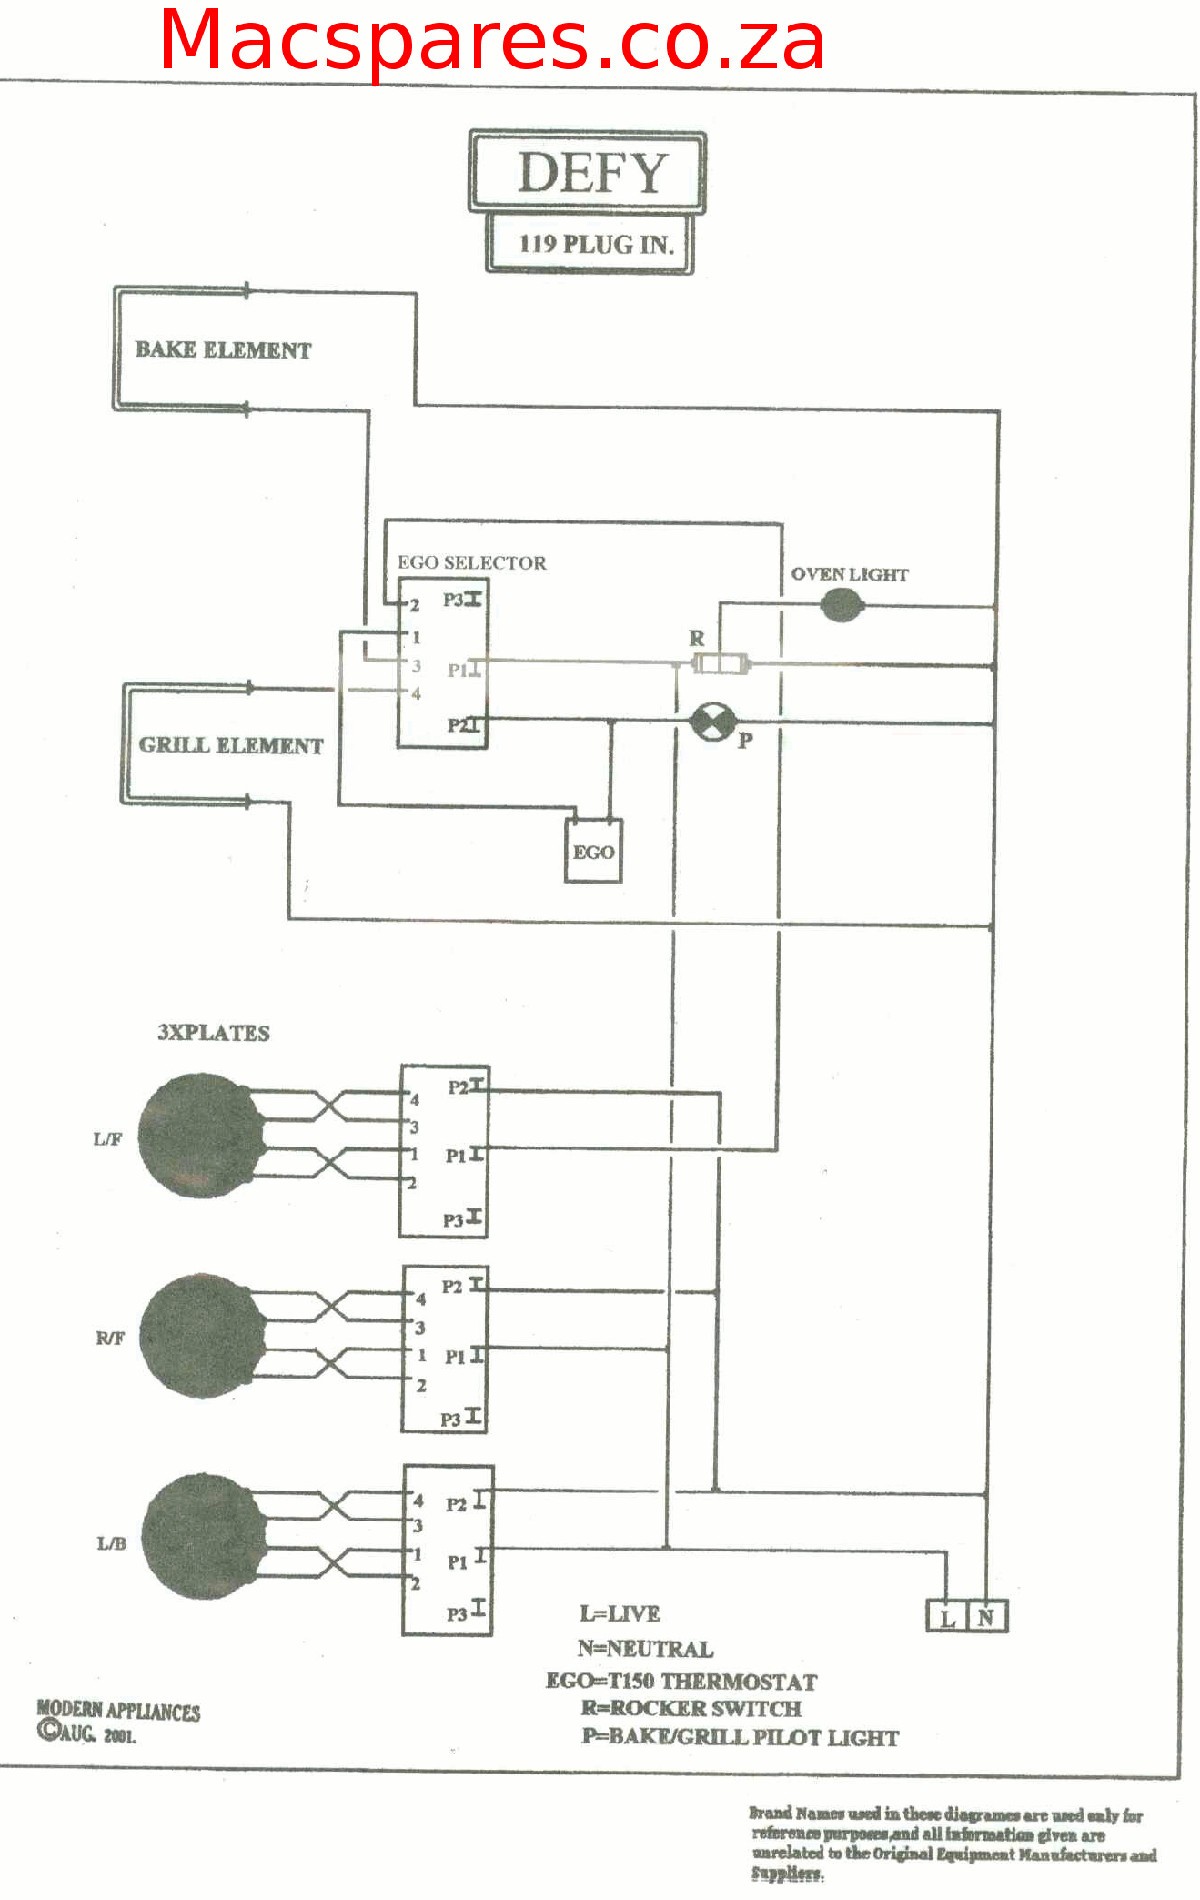 Wiring Diagram Timer Relay New Wiring Diagrams Stoves Macspares Wiring Diagram for Electric Stove New